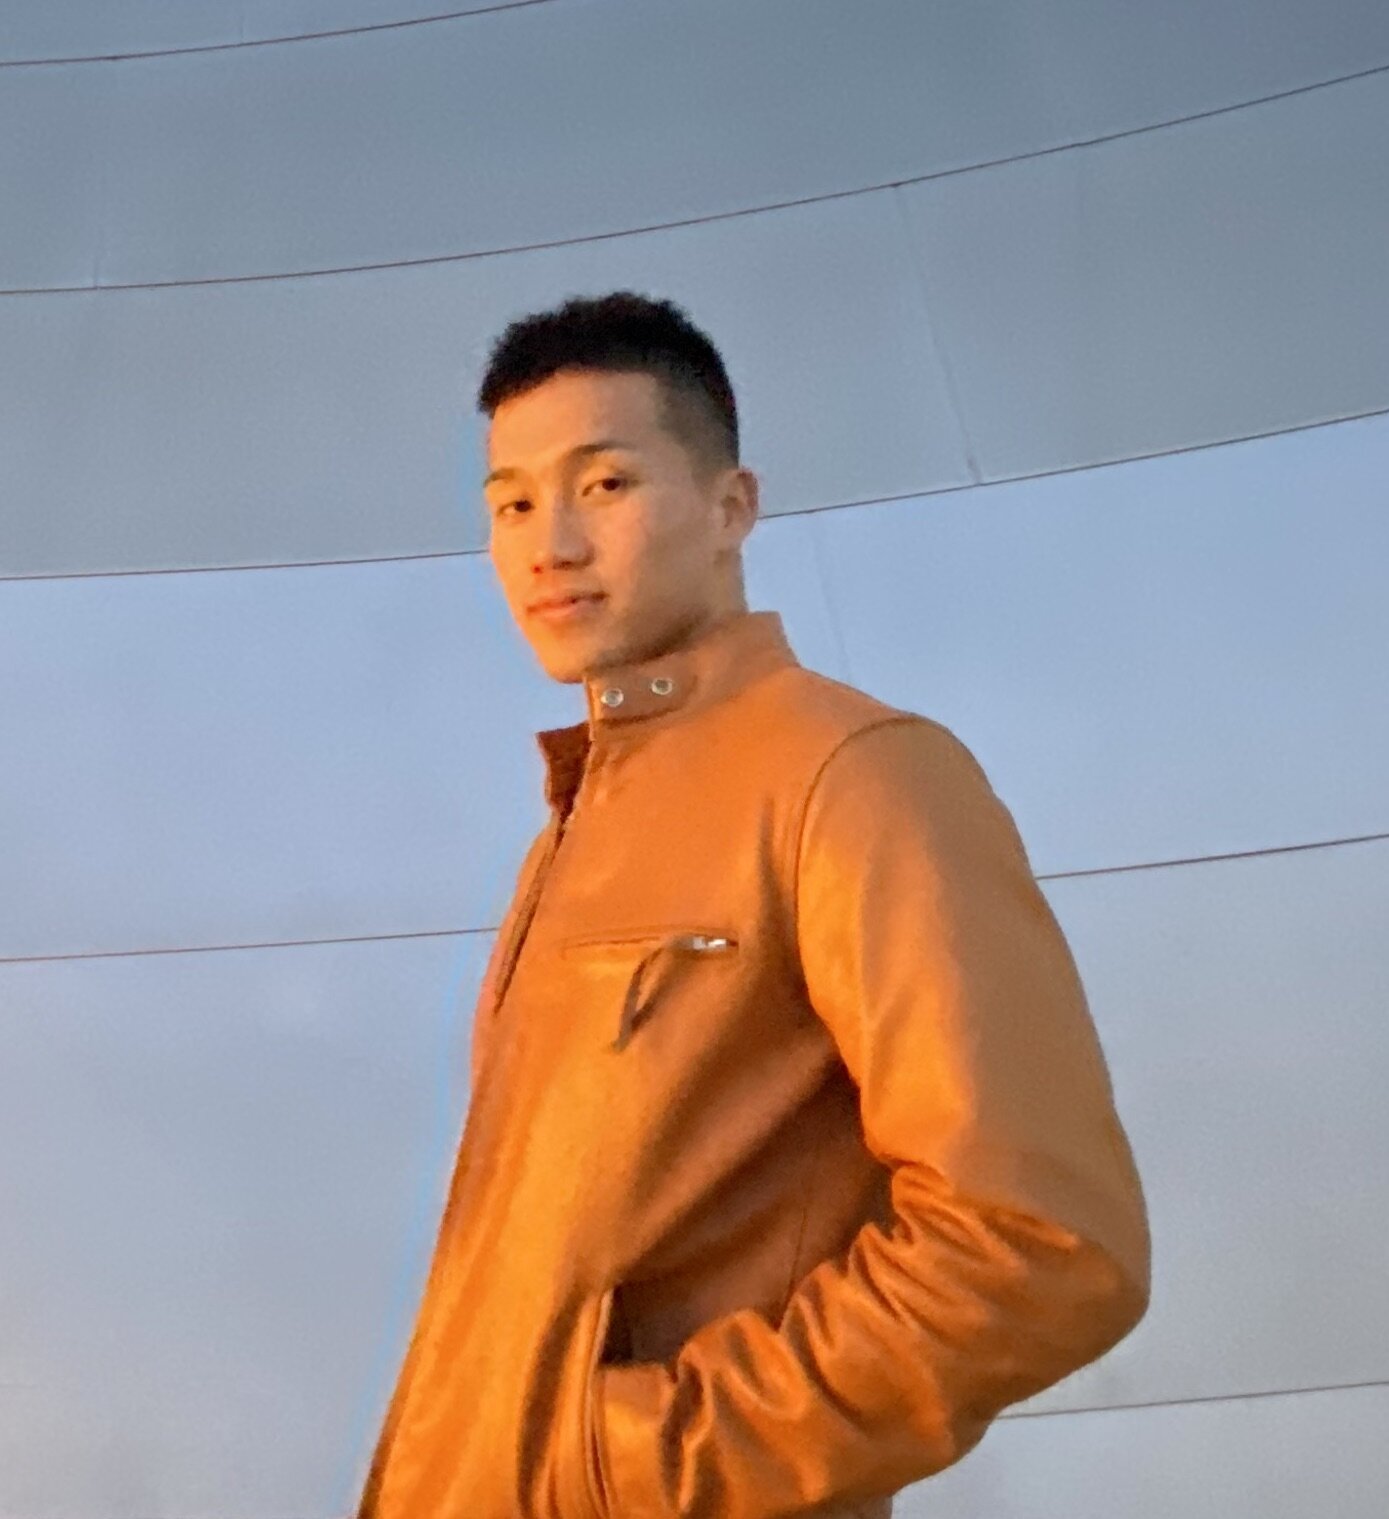 A scammer socially engineered Andrew Wang